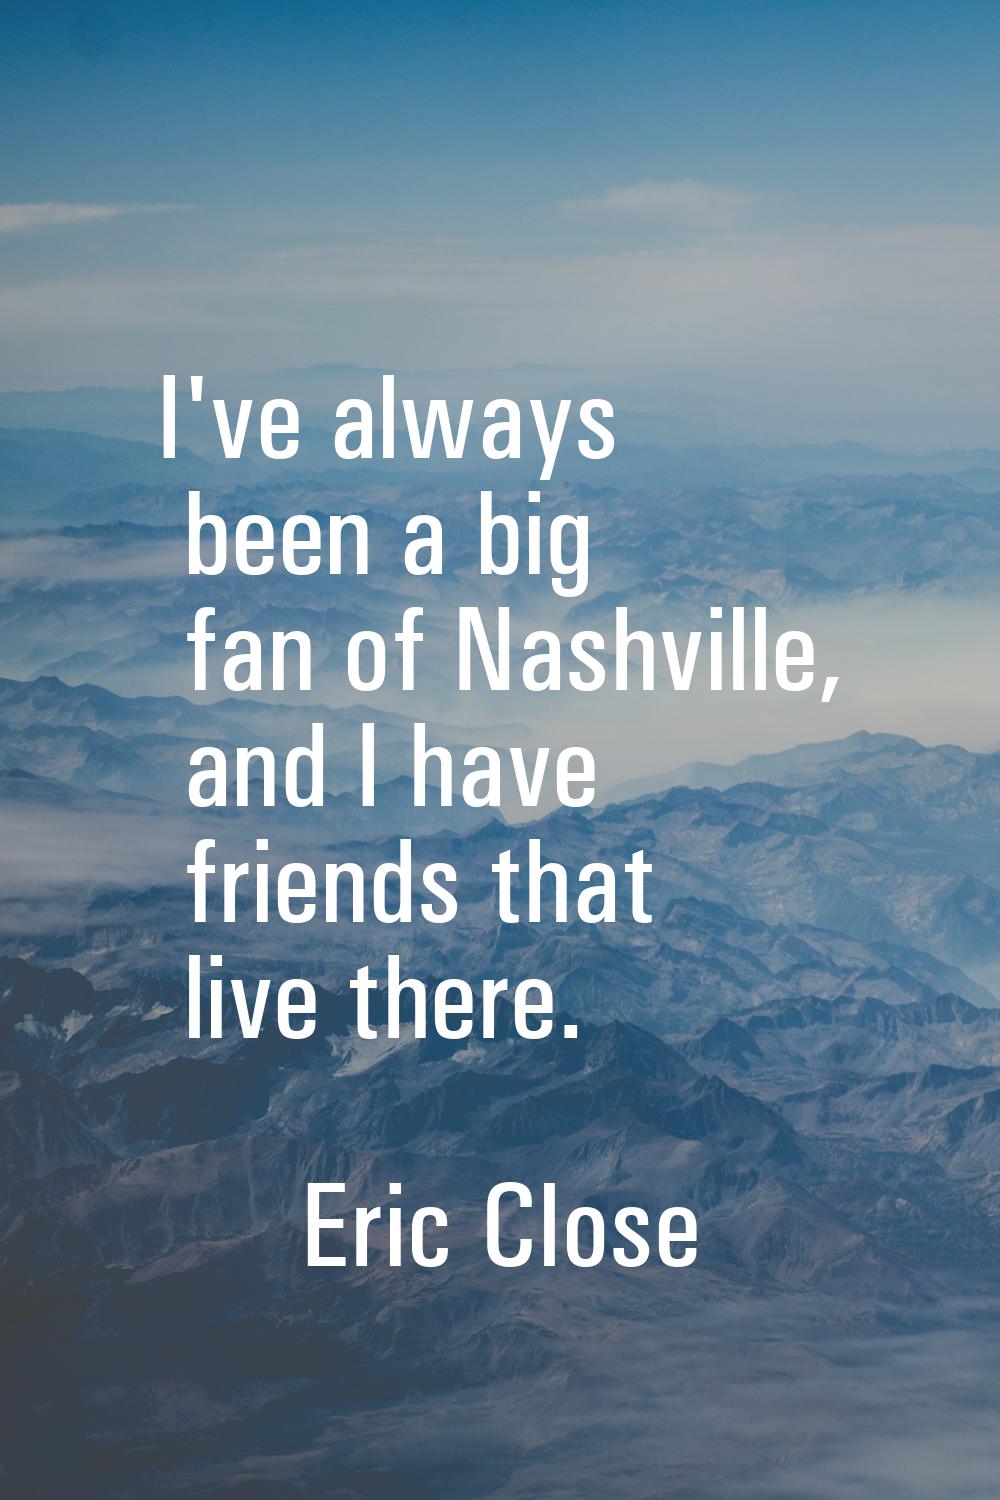 I've always been a big fan of Nashville, and I have friends that live there.